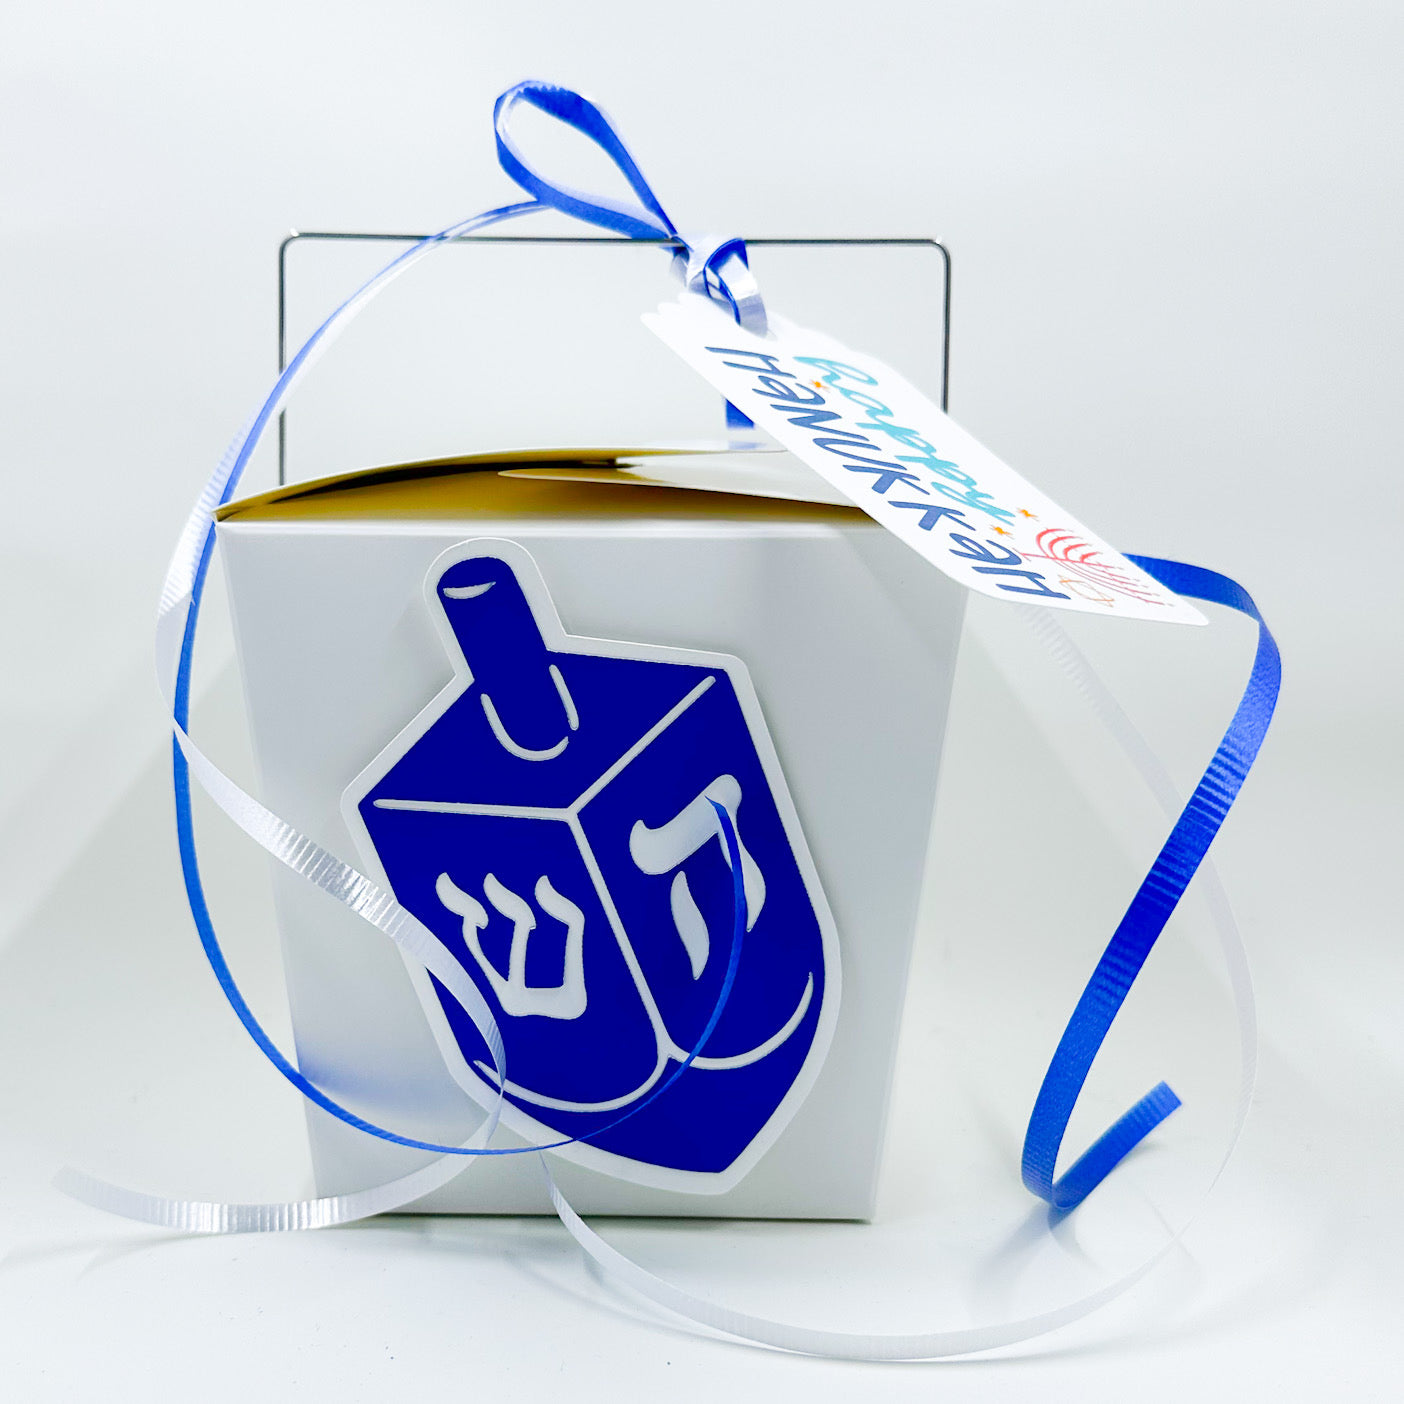 Hanukkah Take-Out Container with goodies